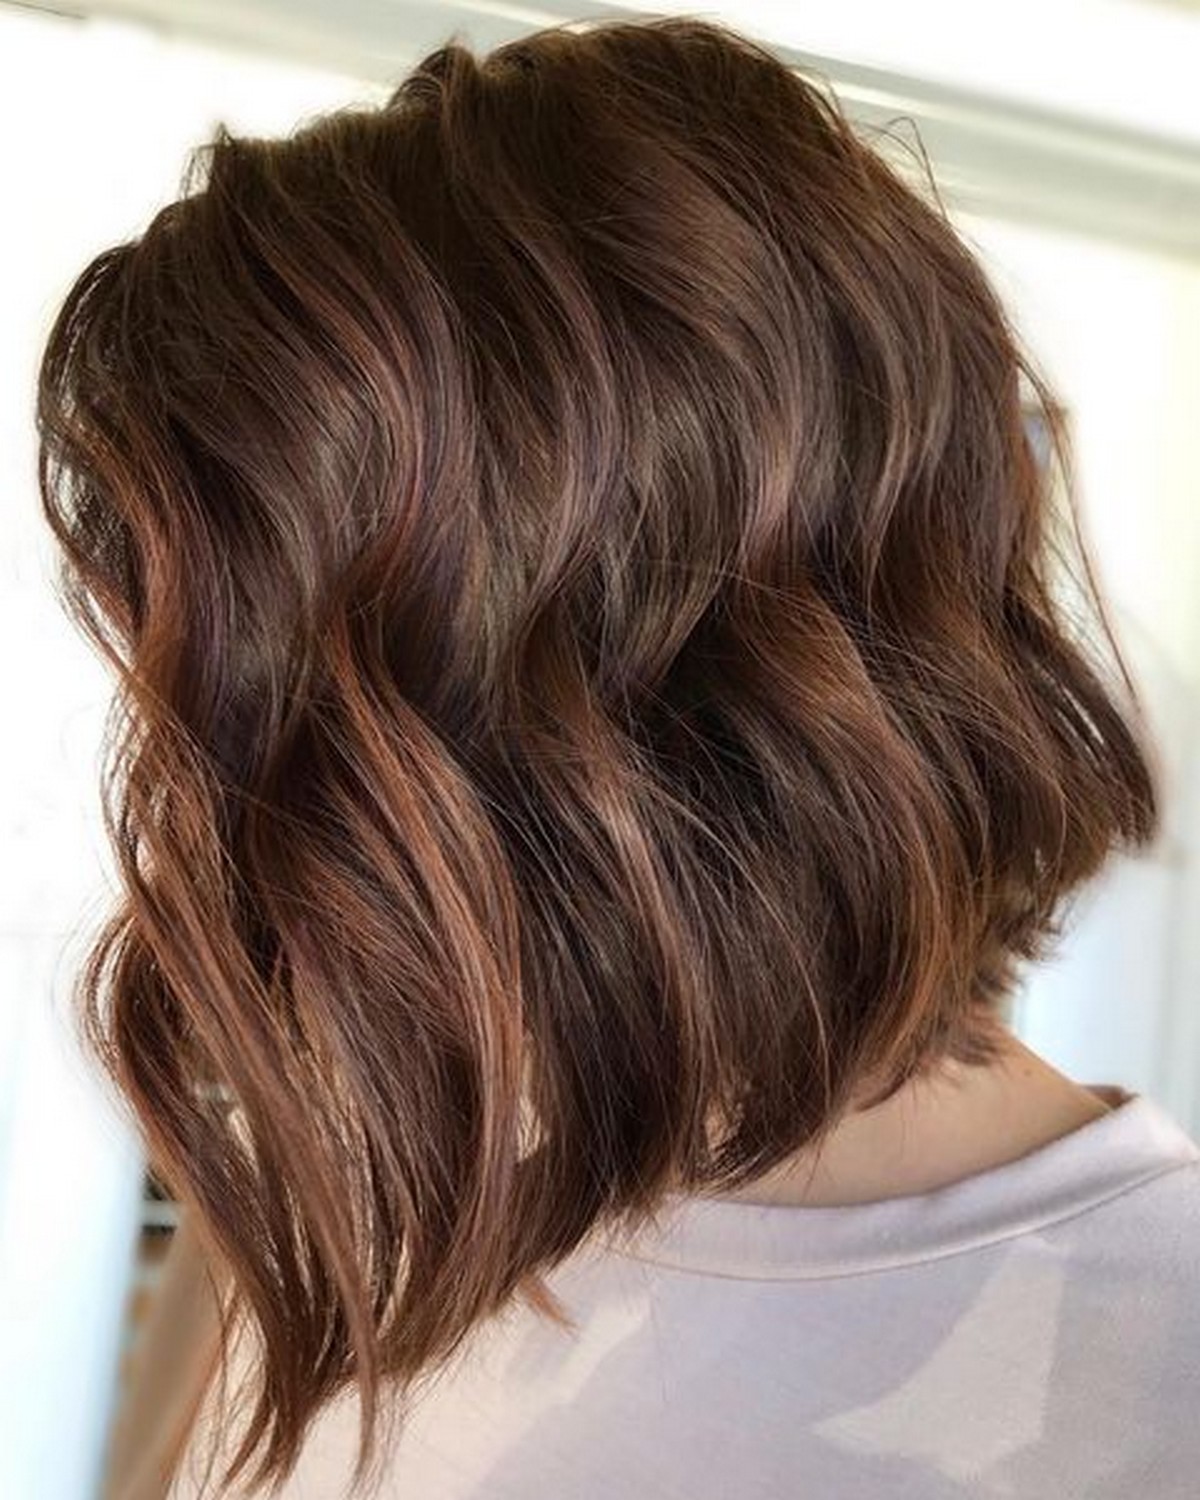 Short Beach Waves With Soft Highlights